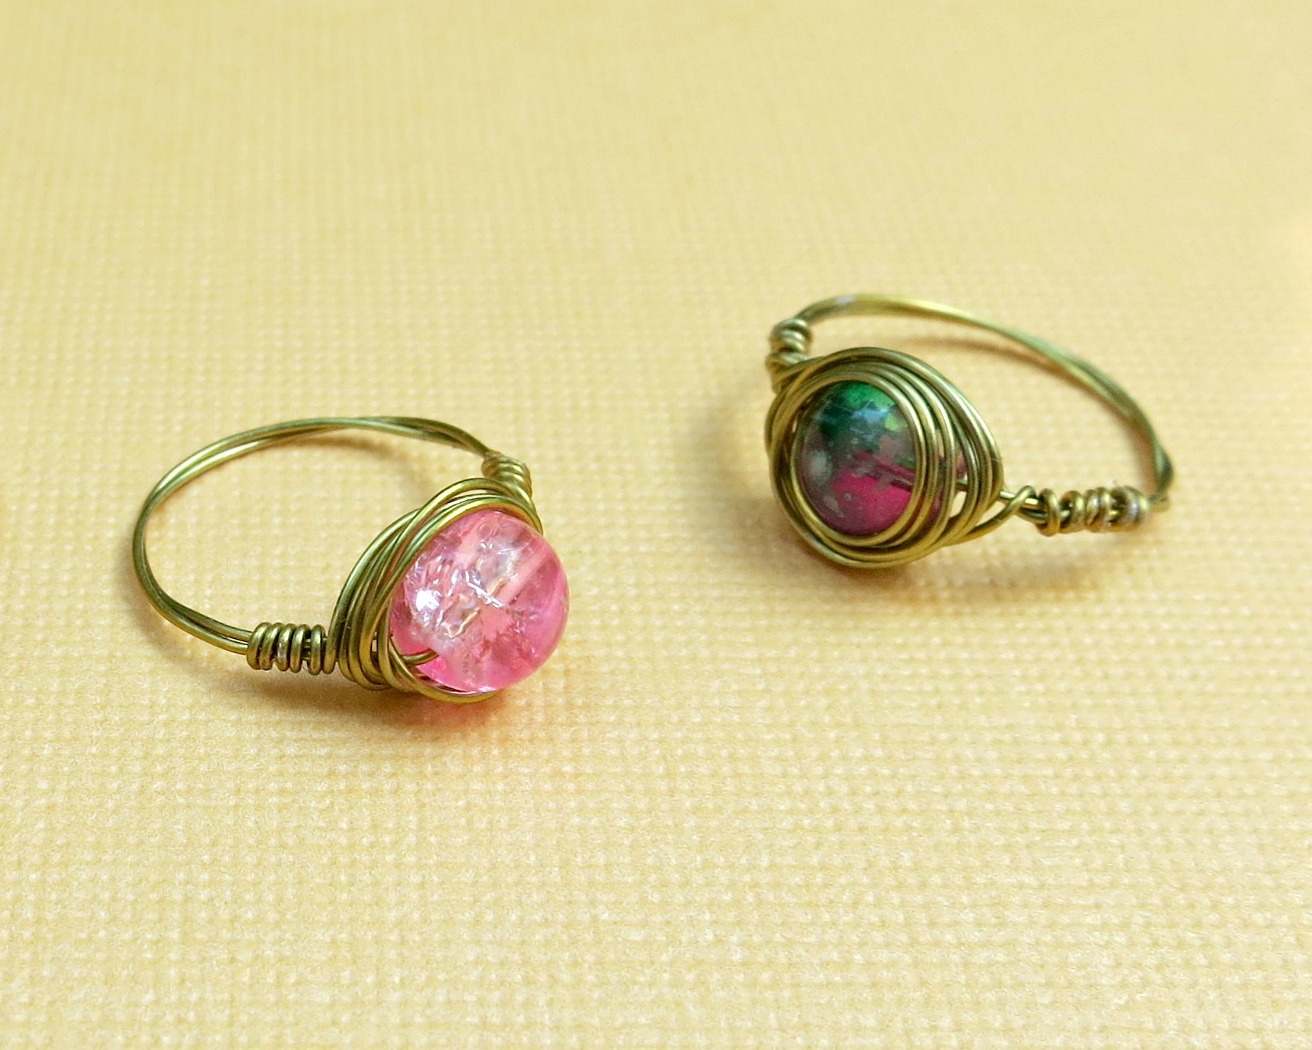 Tutorial: Wire Wrapped Bead Rings » Dollar Store Crafts